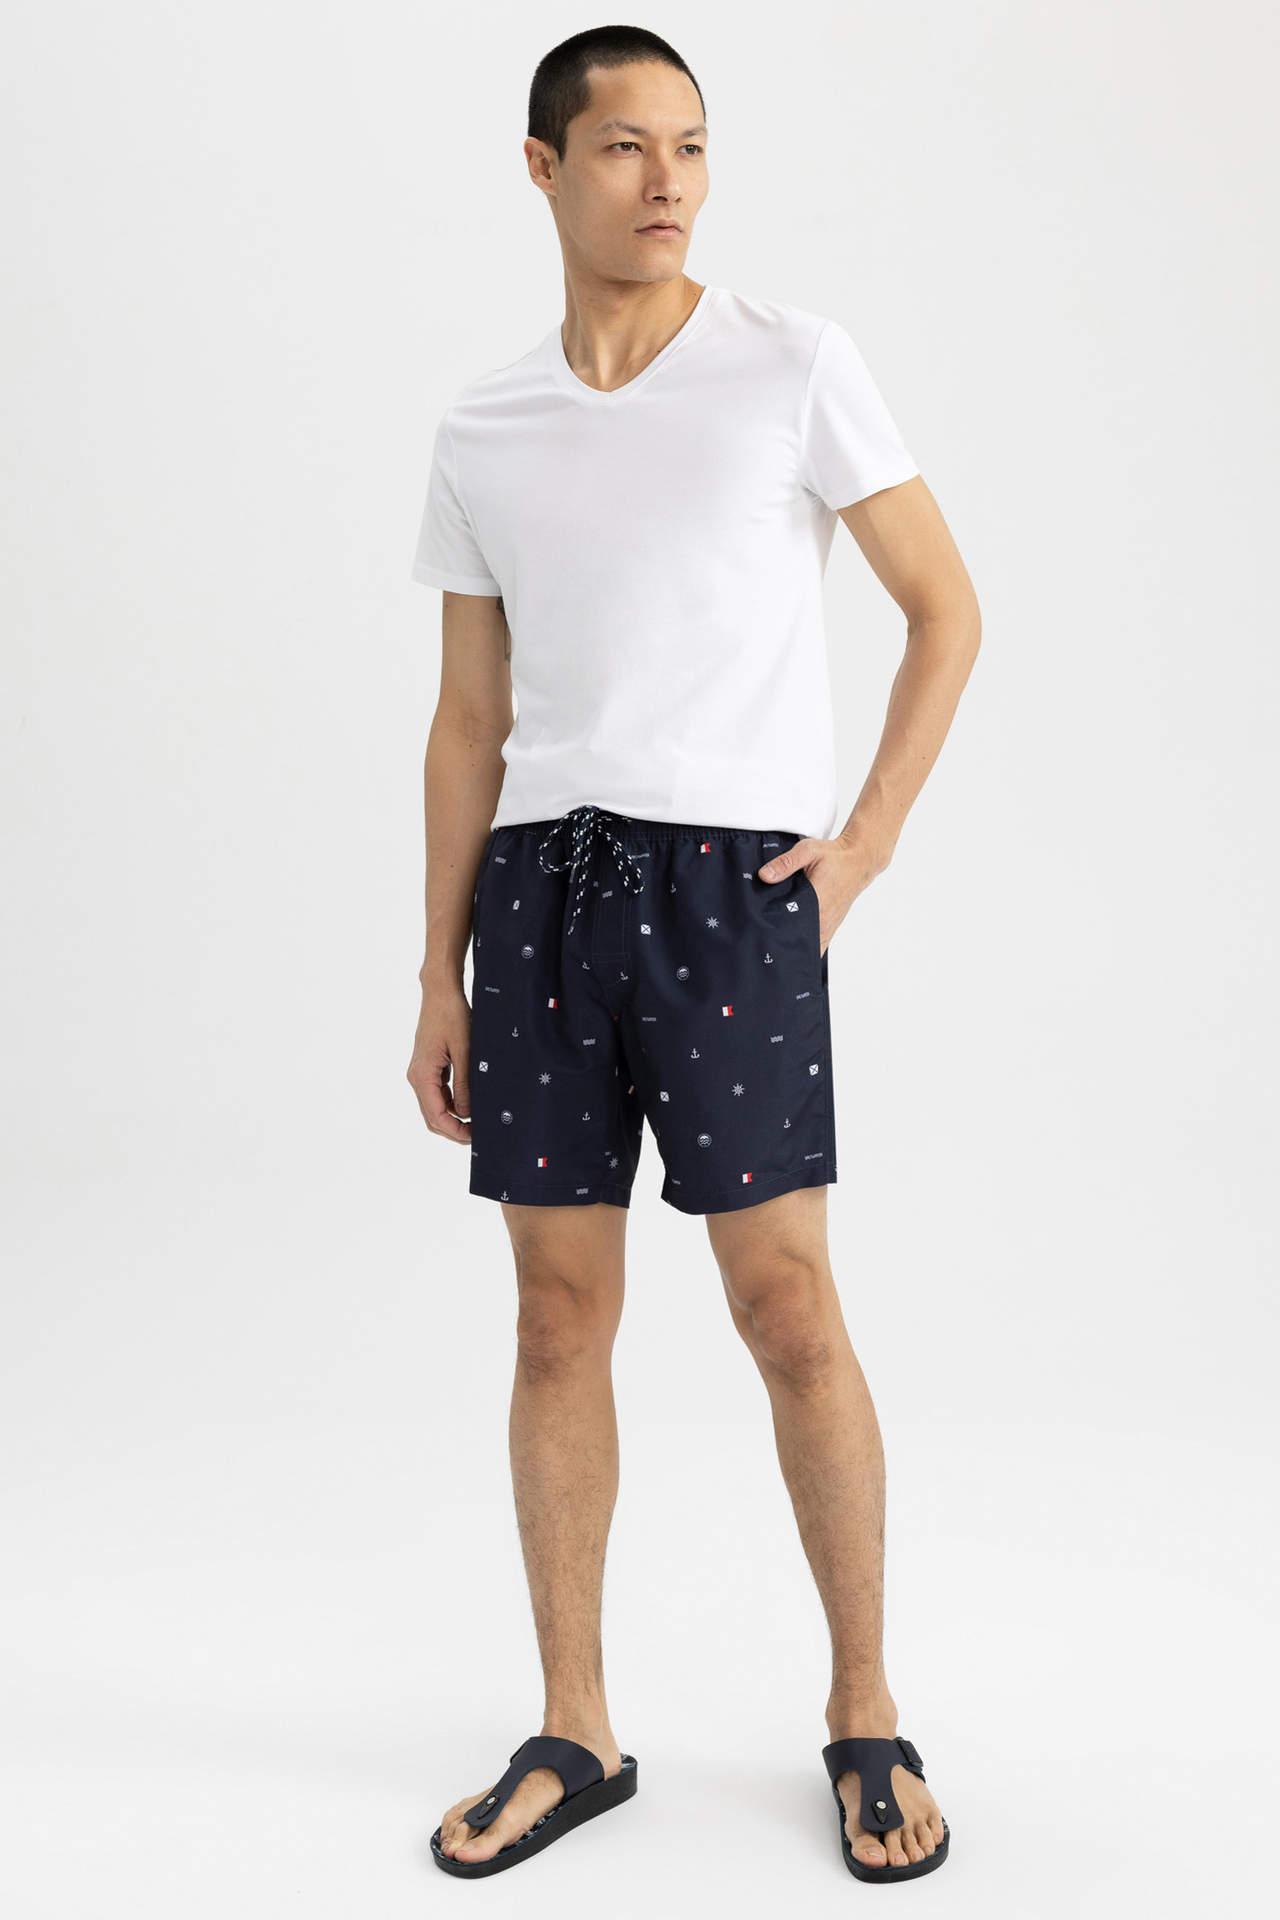 DEFACTO Regular Fit Above Knee Swimming Shorts